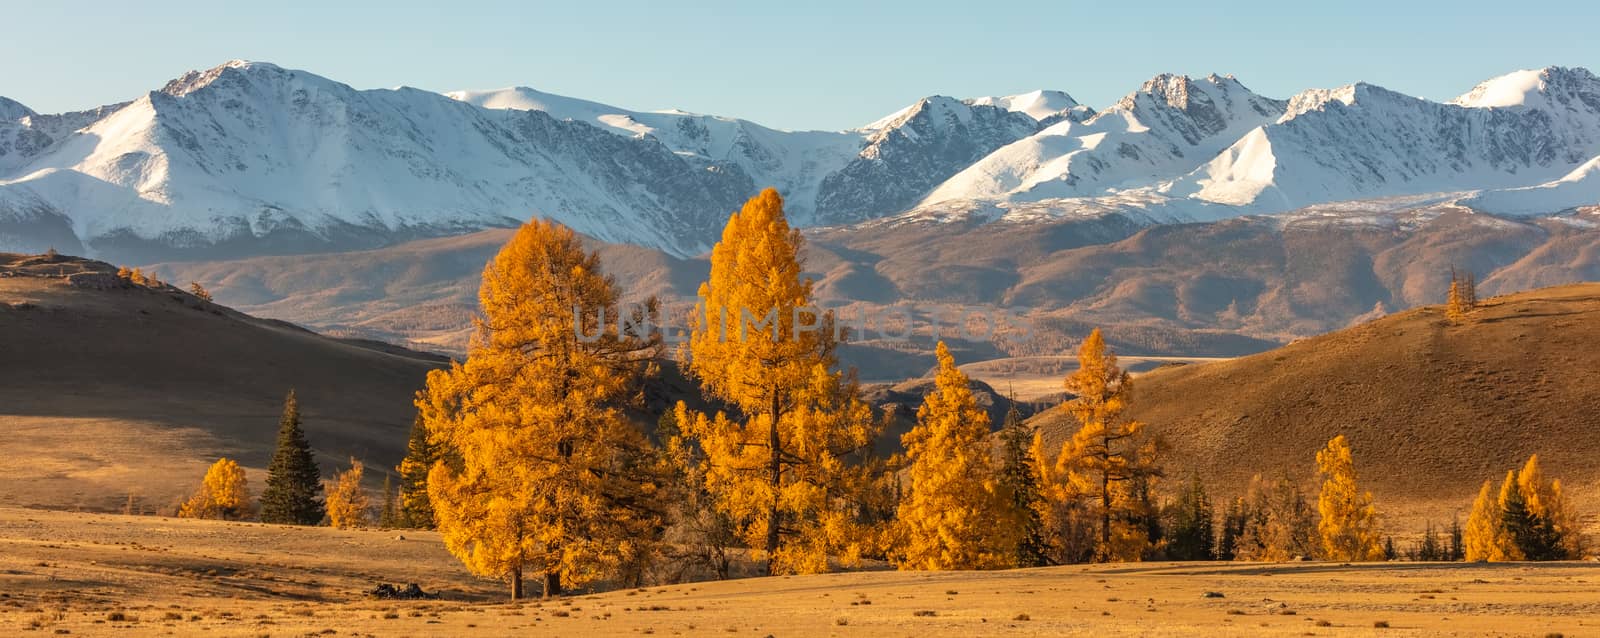 Beautiful panorama of a valley full of golden trees in the foreground and white snowy mountains in the background. Sunrise. Fall time. Altai mountains, Russia. Golden hour by DamantisZ